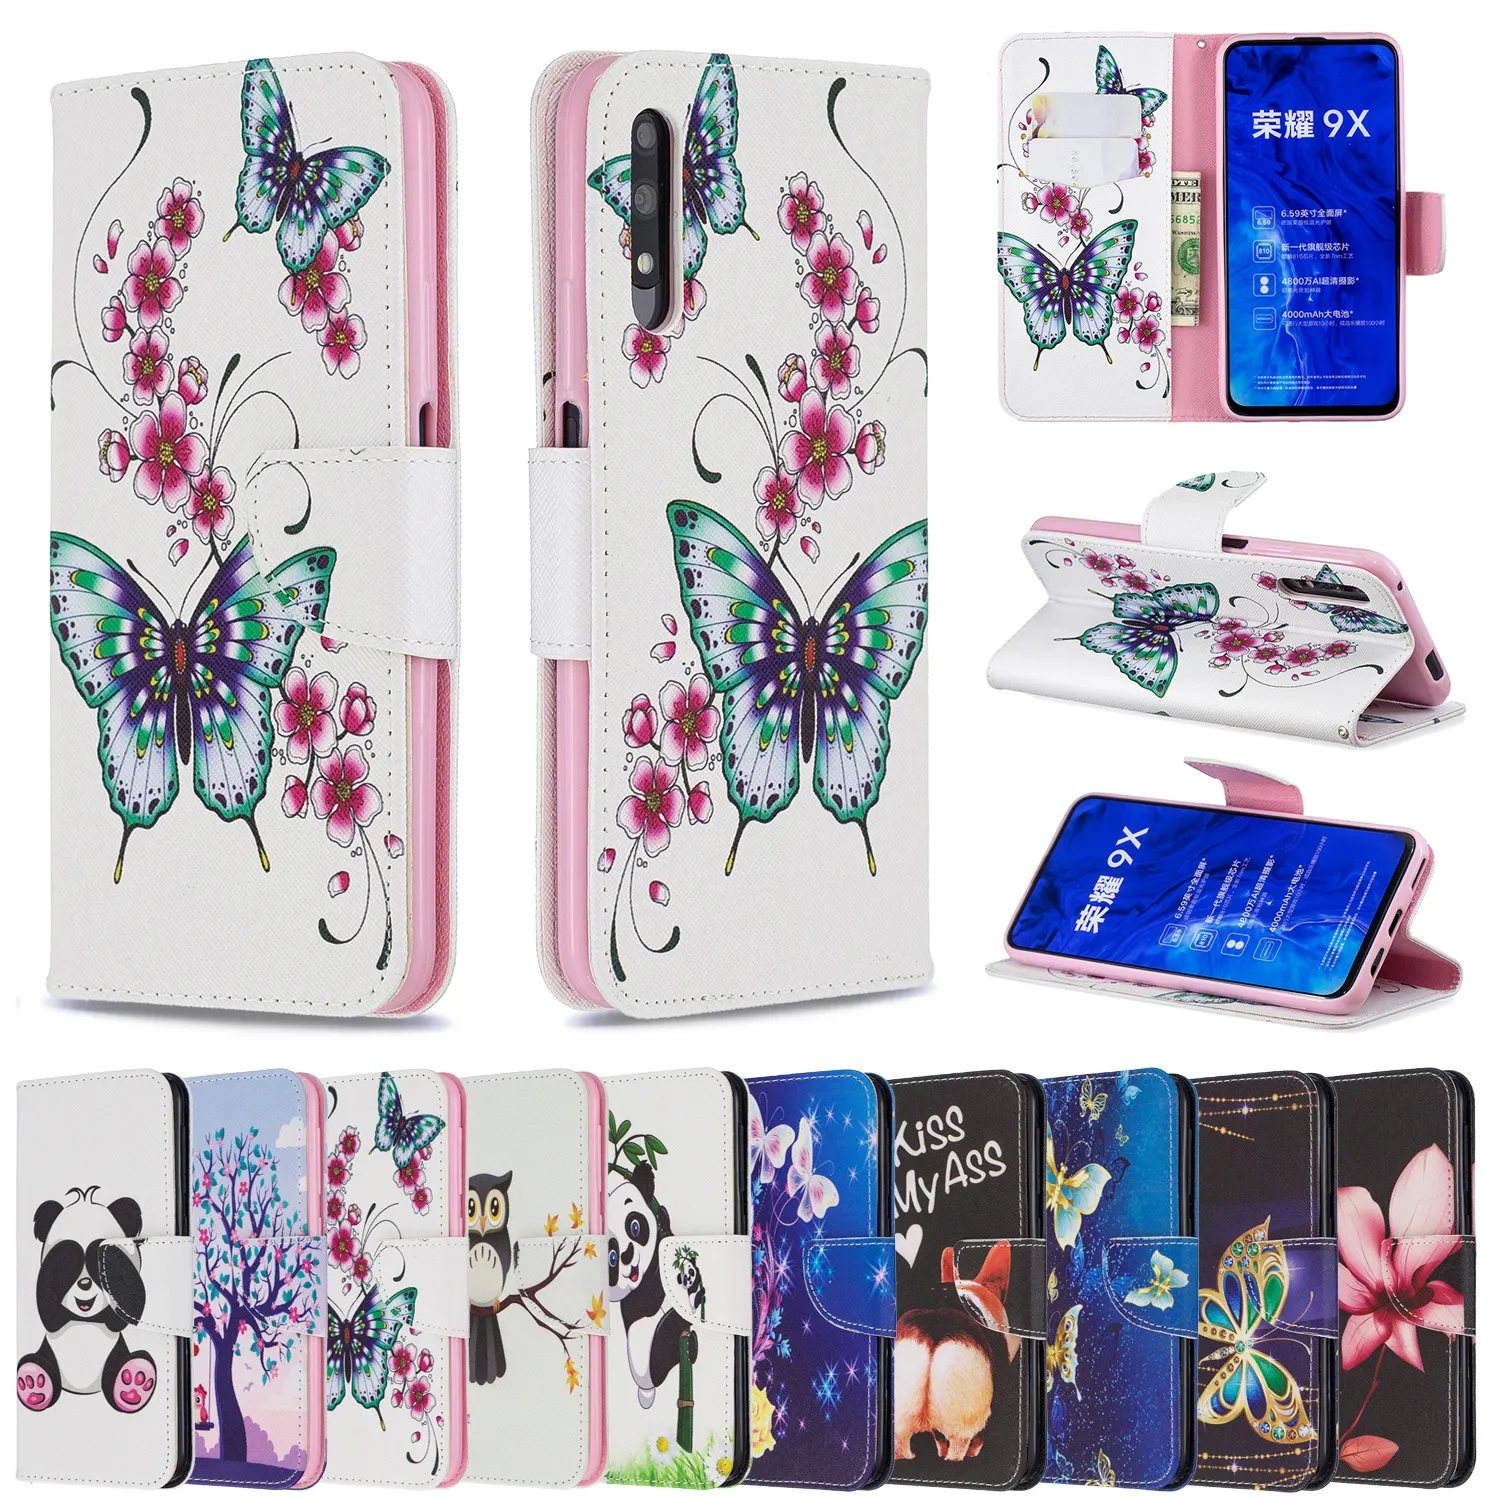 Wallet Case Flip Leather Cover For Huawei Honor 9X 9 PU Printing Book Case Stand Card Holder Cover